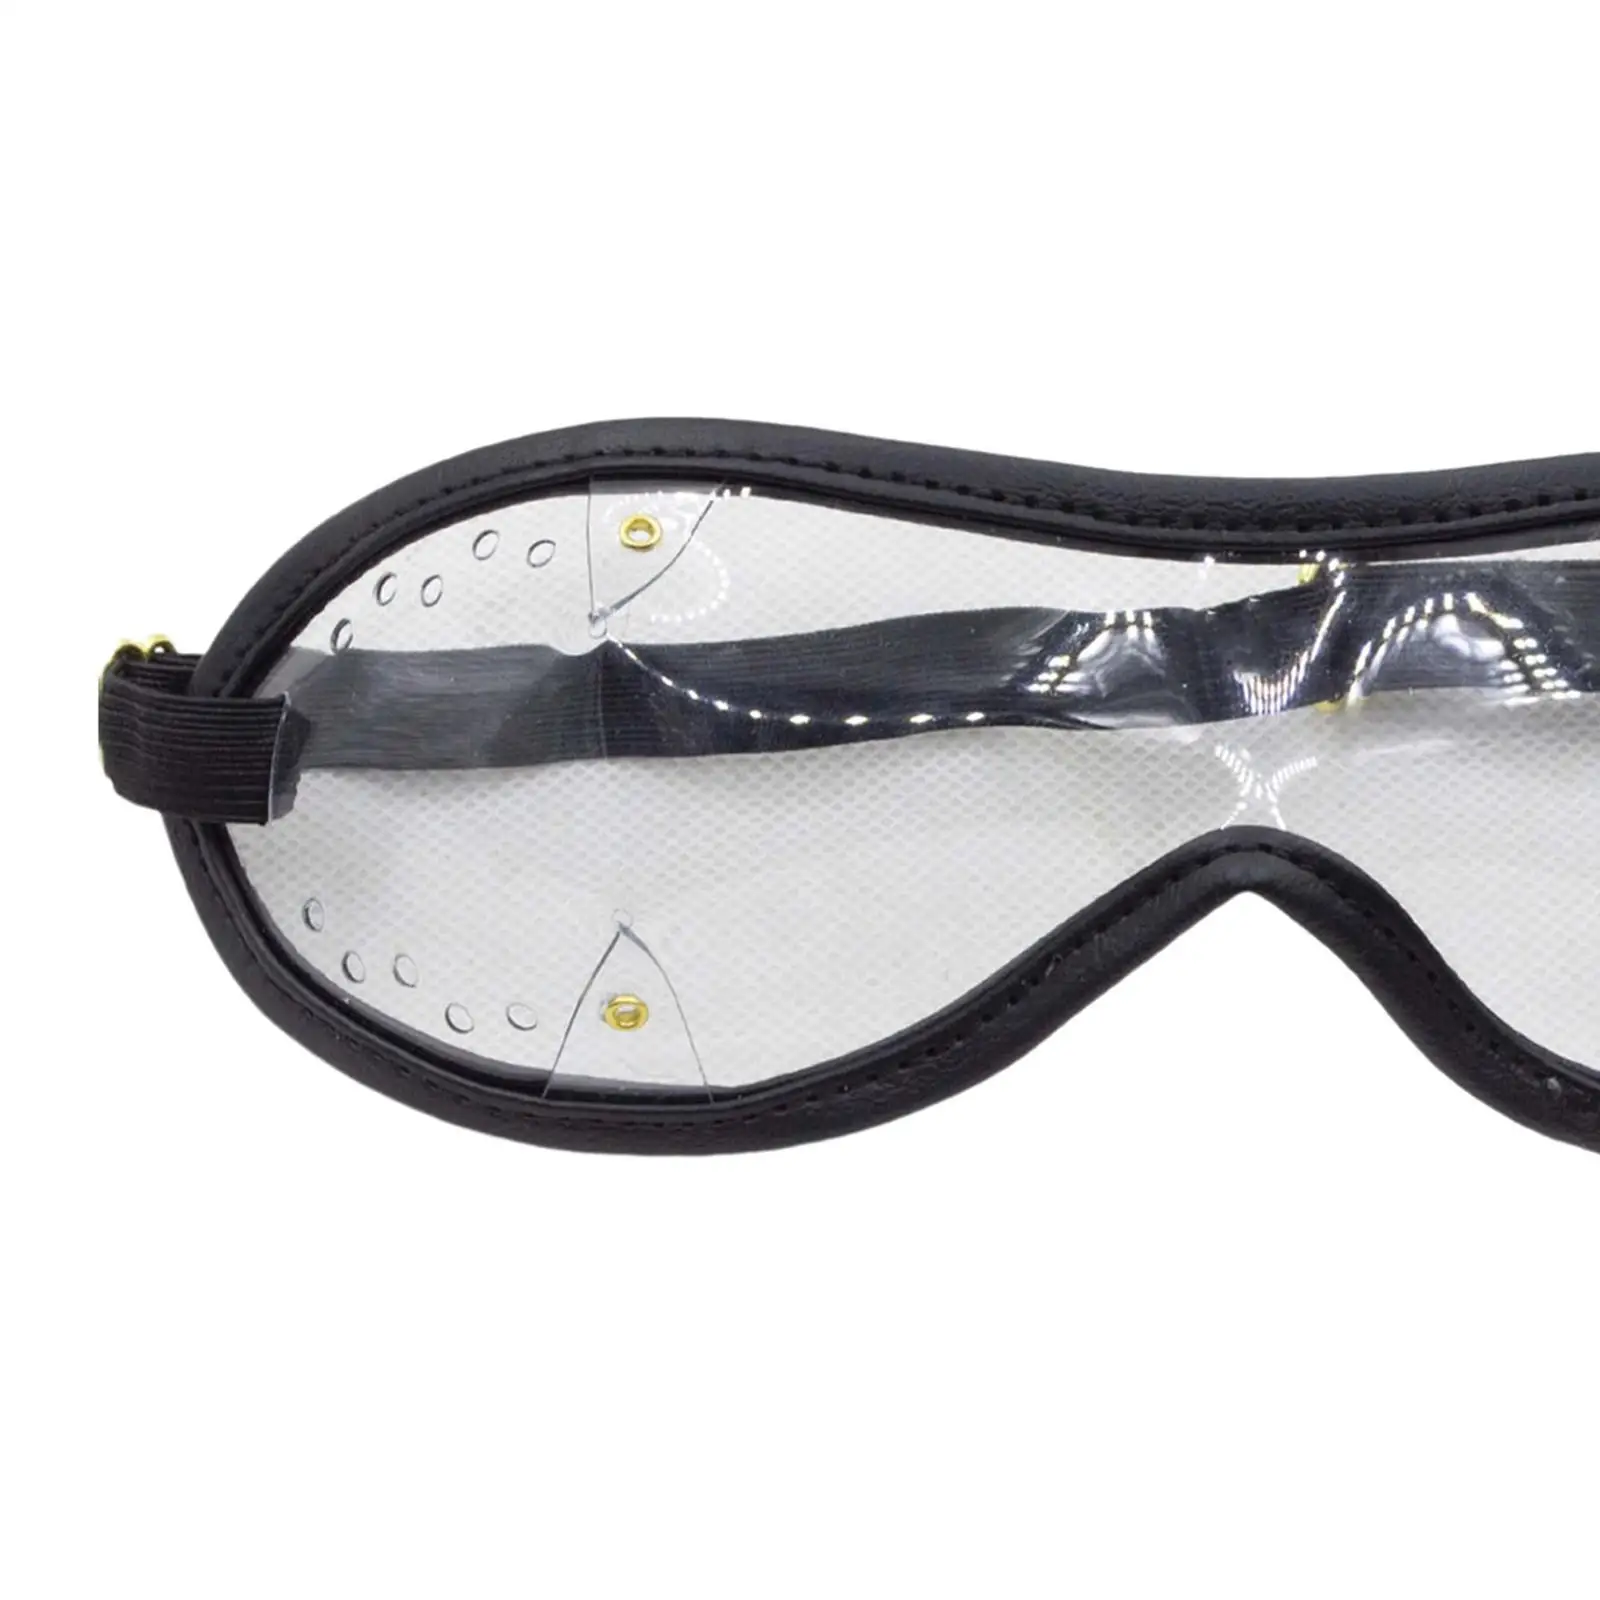 

Skydiver Goggles Eye Protection with Adjustable Strap for Skating Hiking Black